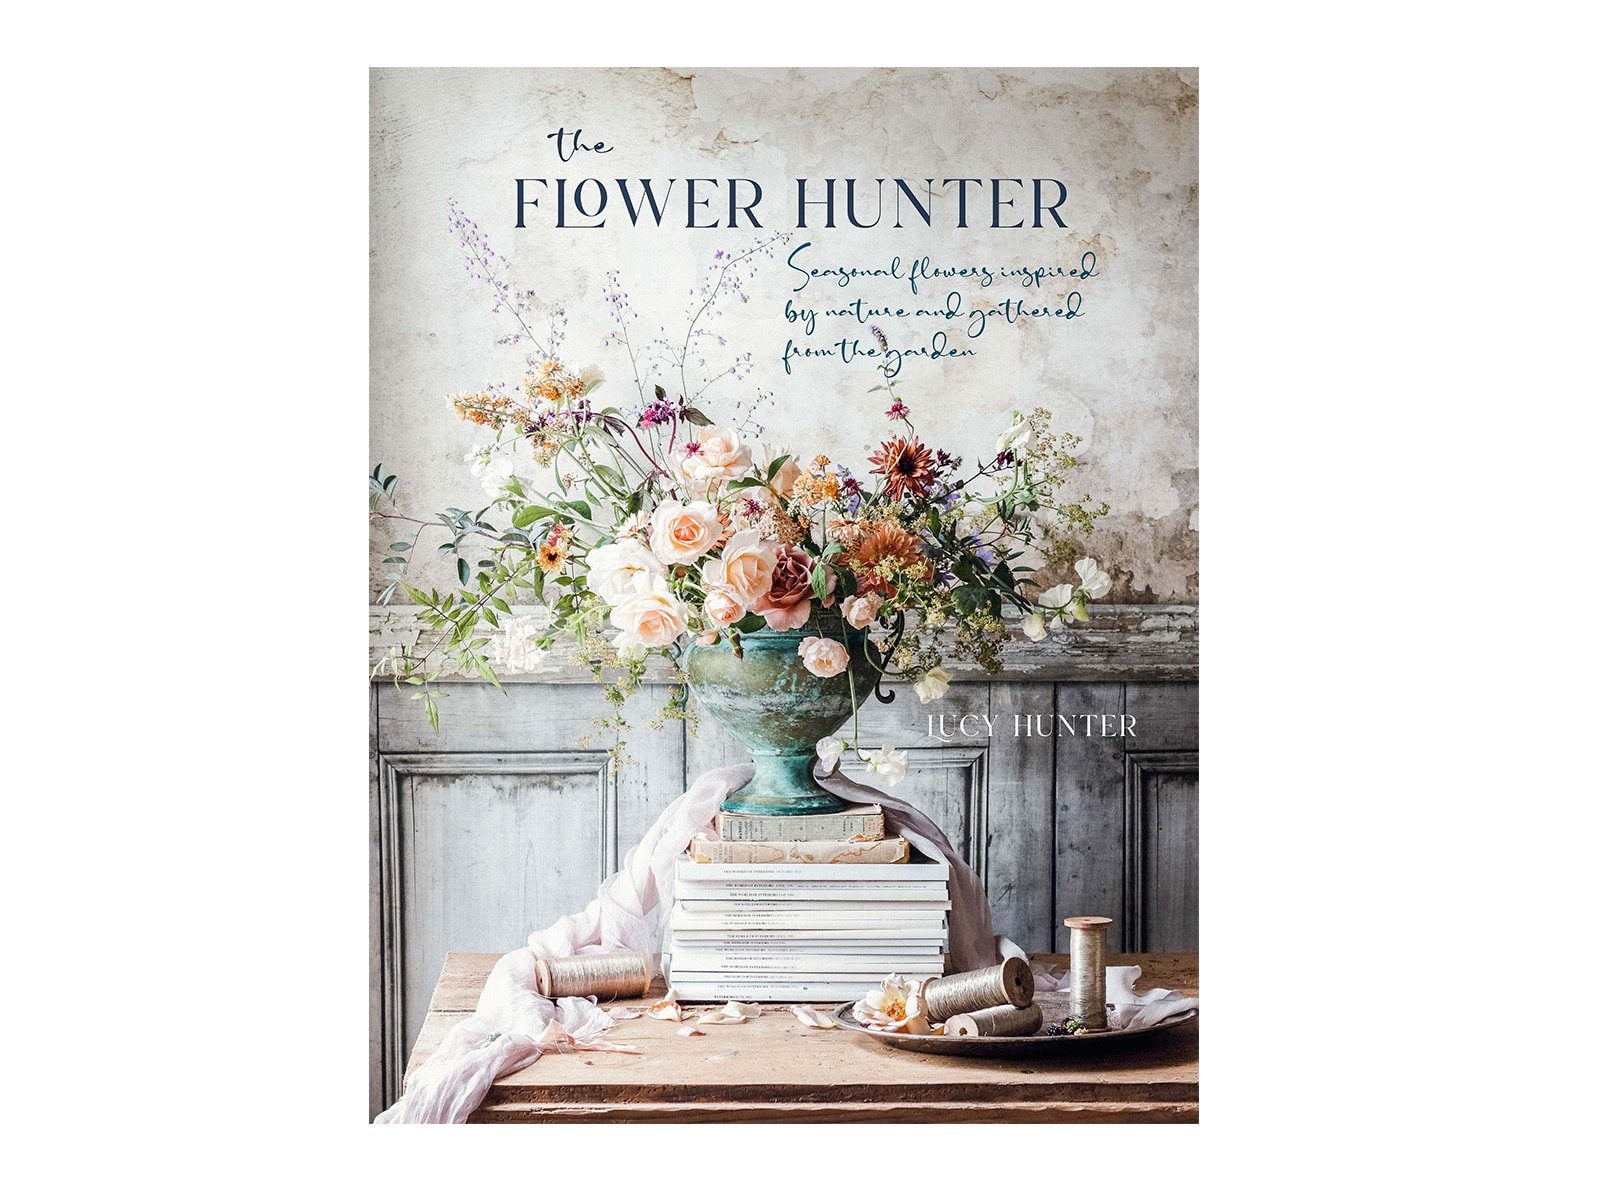 The Flower Hunter by Lucy Hunter (Ryland Peters & Small, distributed by bookreps.co.nz, RRP $69.99)